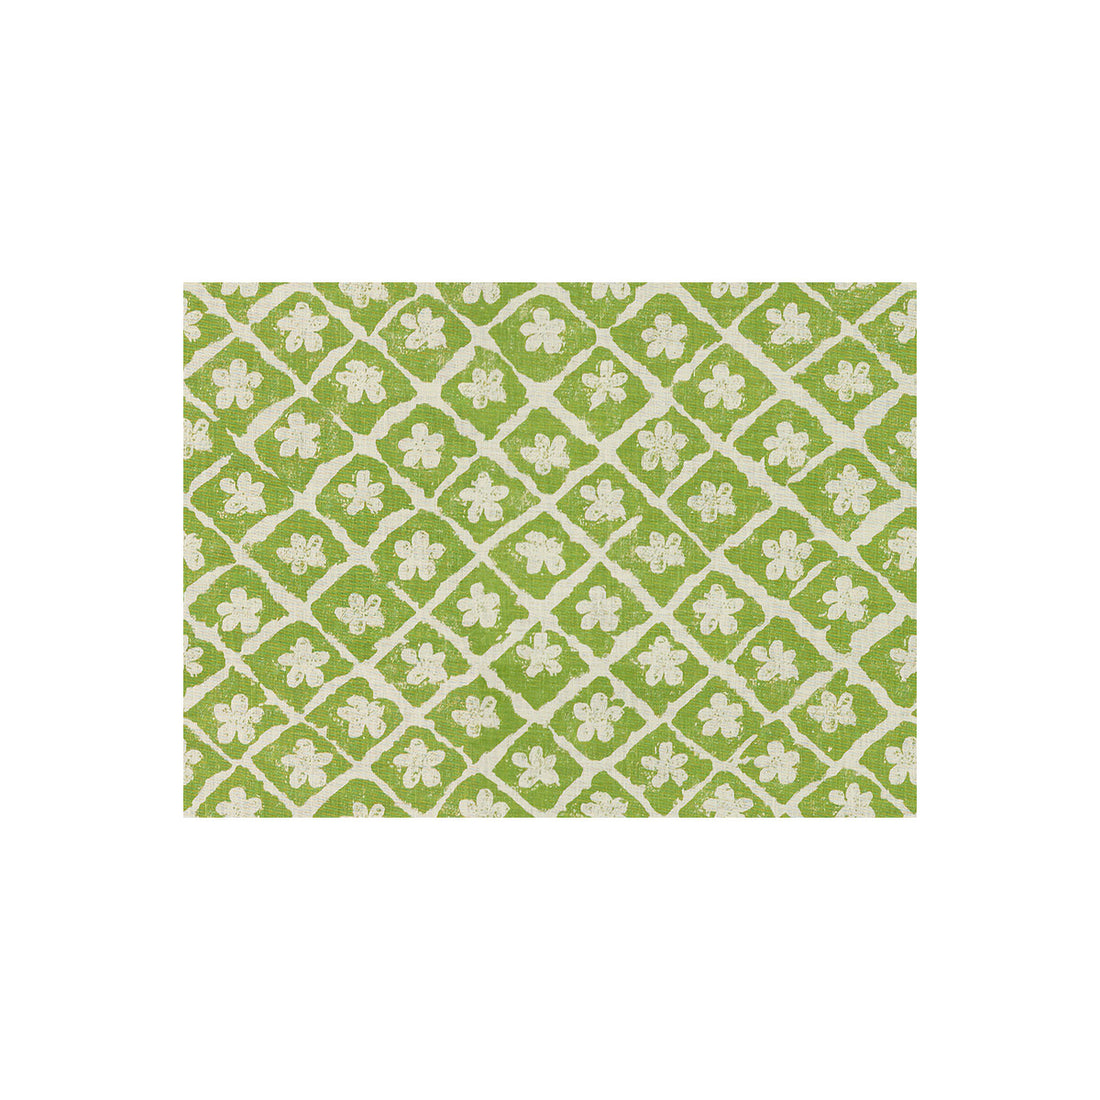 Pomeroy fabric in green/oyster color - pattern BFC-3521.3.0 - by Lee Jofa in the Blithfield collection